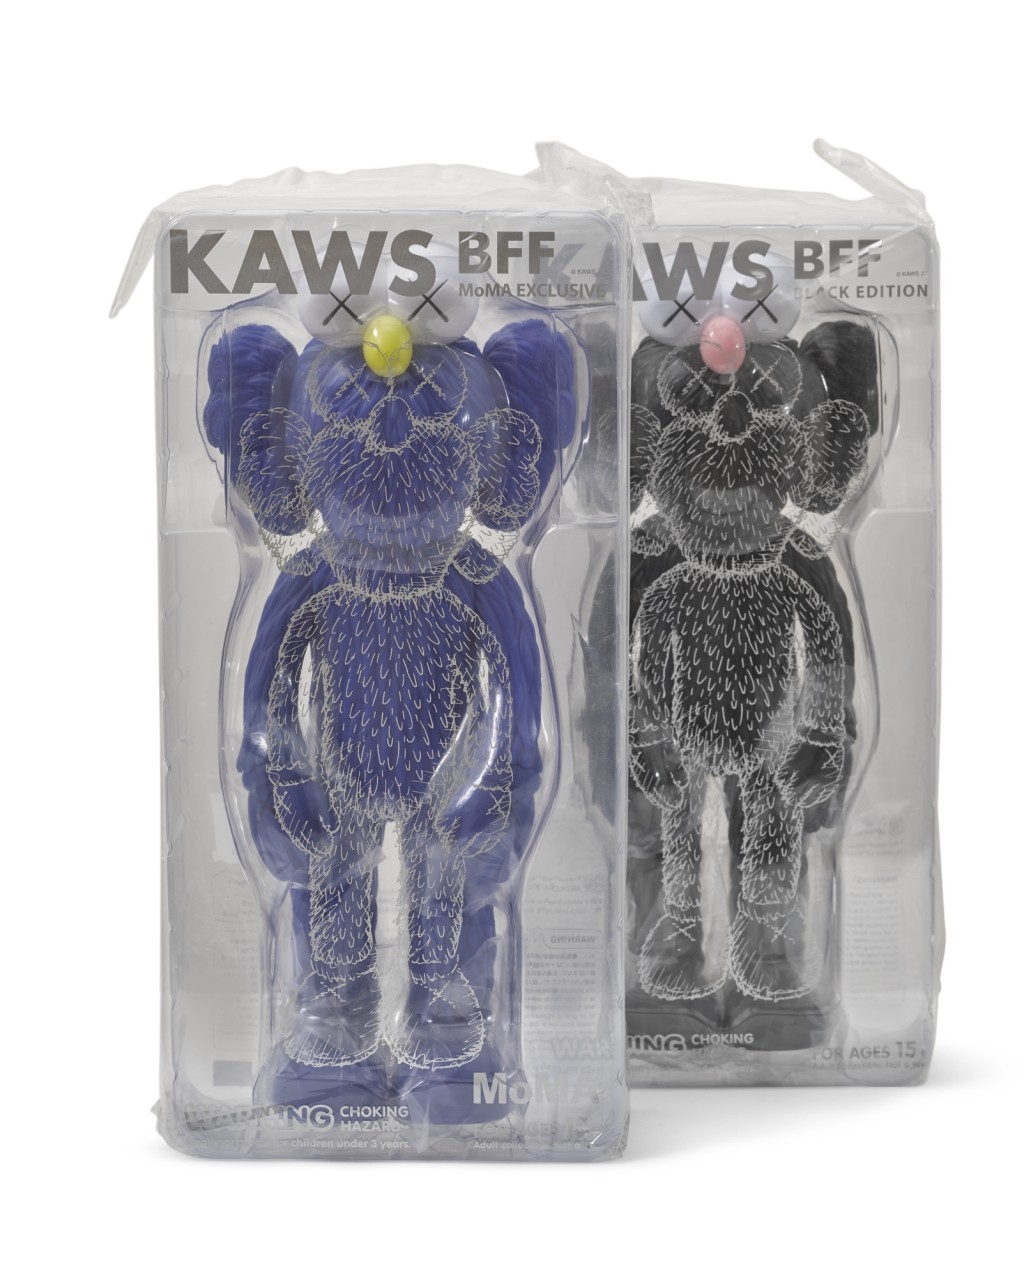 KAWS | BFF-MOMA EXCLUSIVE & BLACK EDITION (SET OF TWO) (2017 